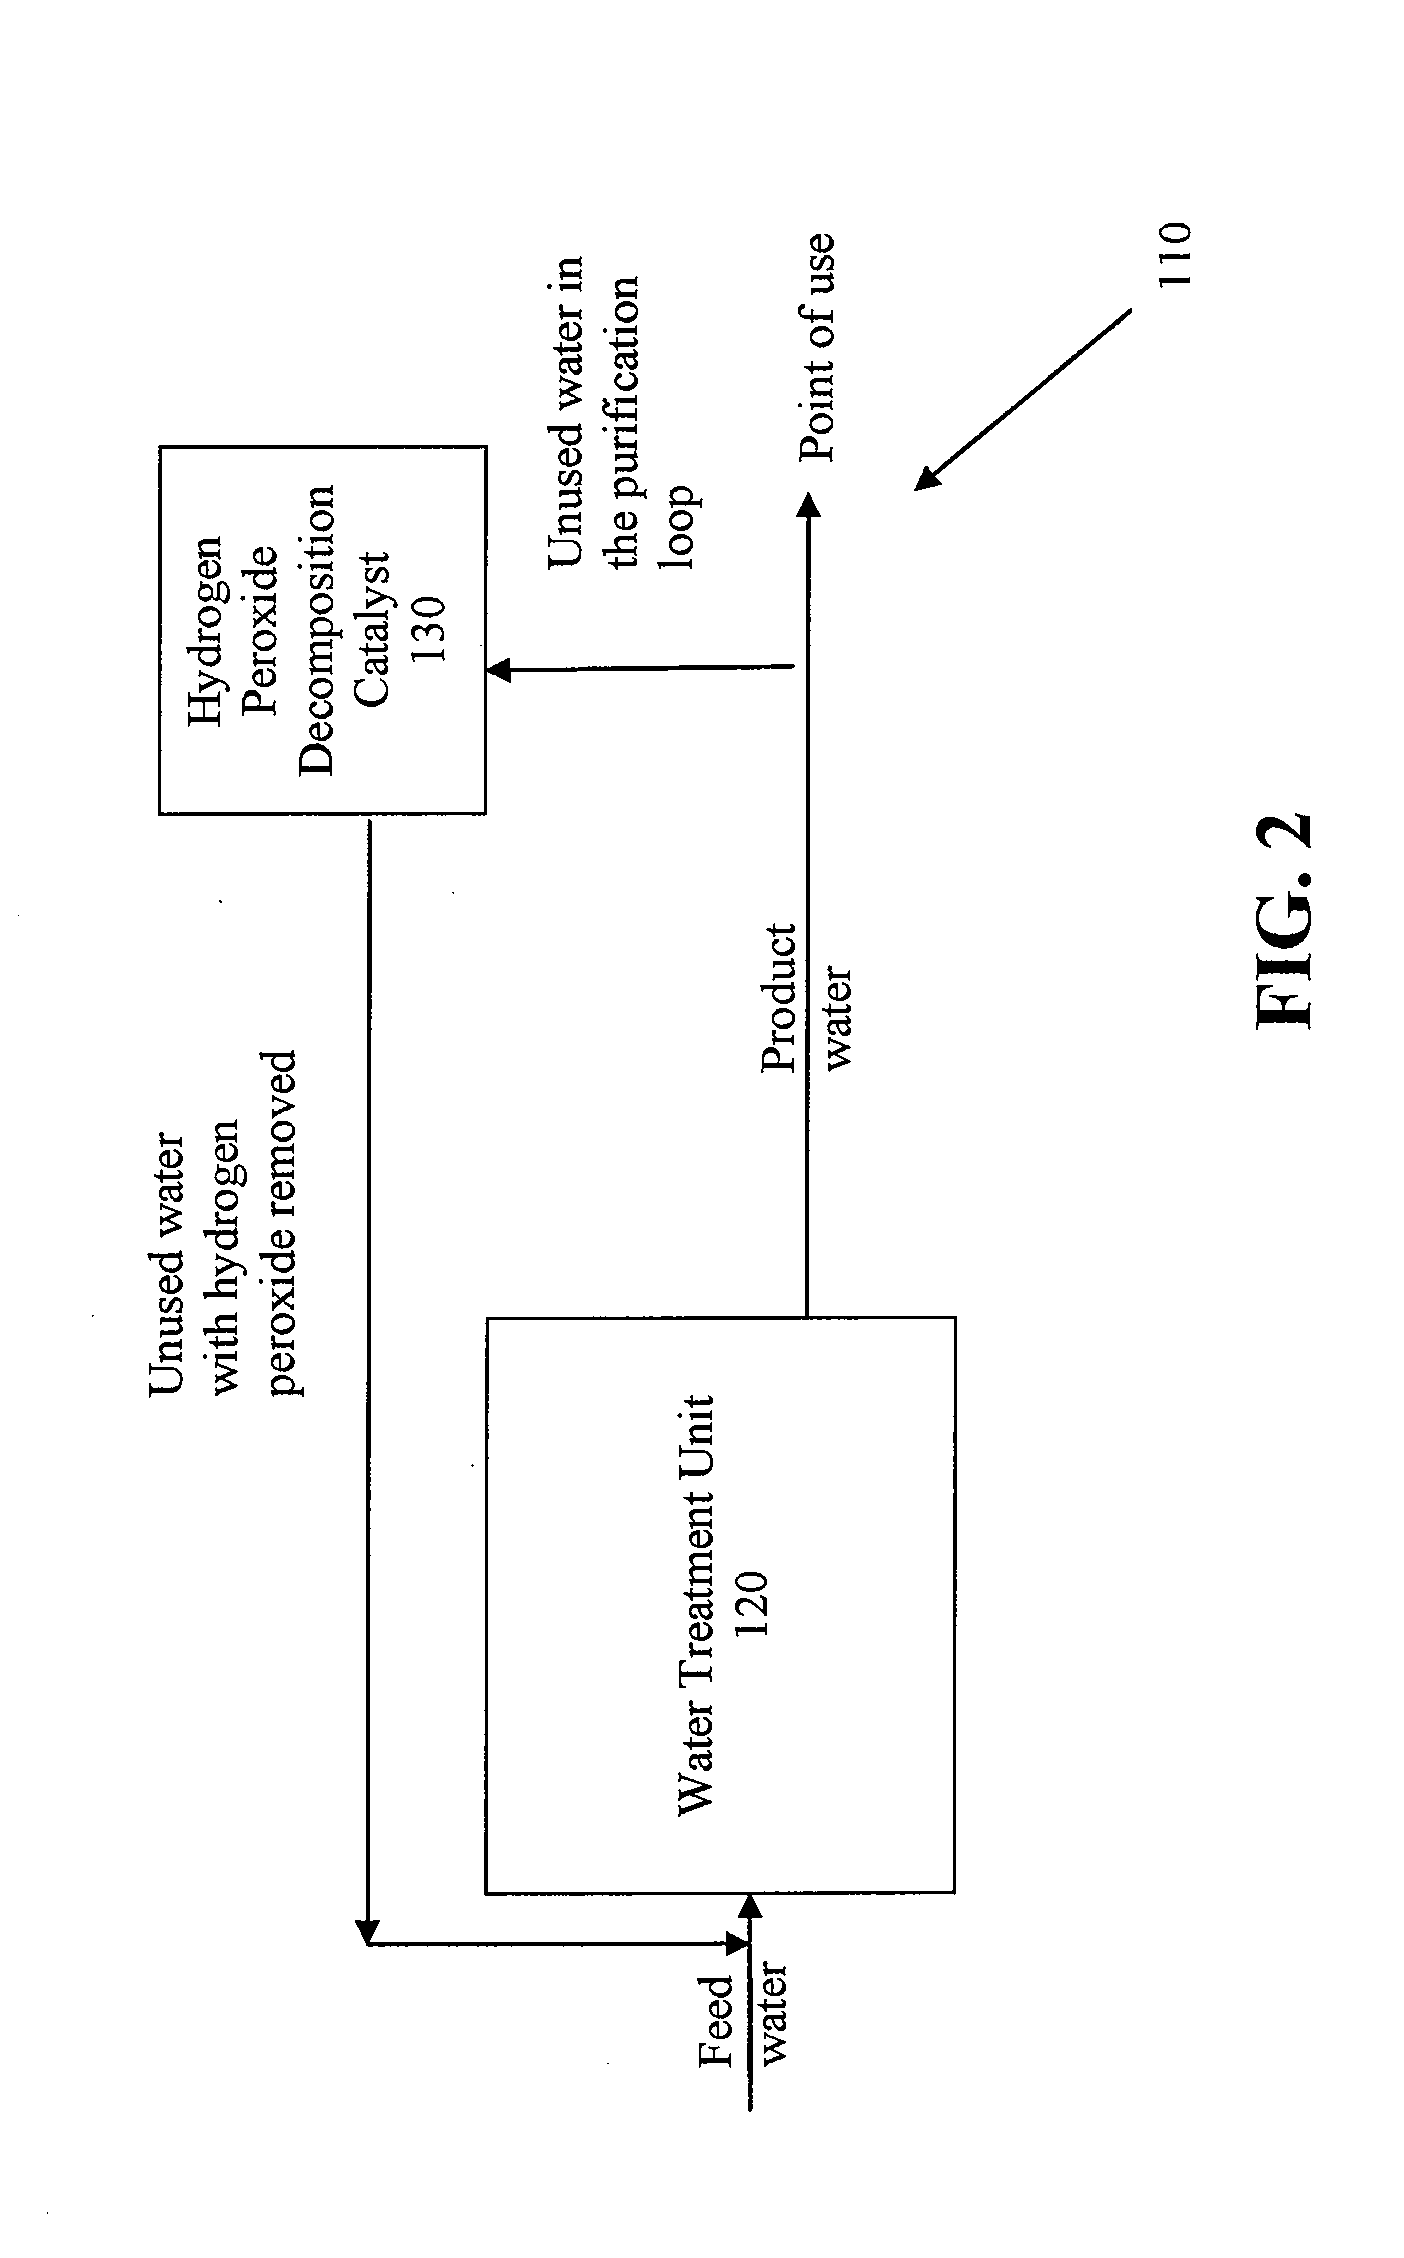 Systems and methods for removing hydrogen peroxide from water purification systems